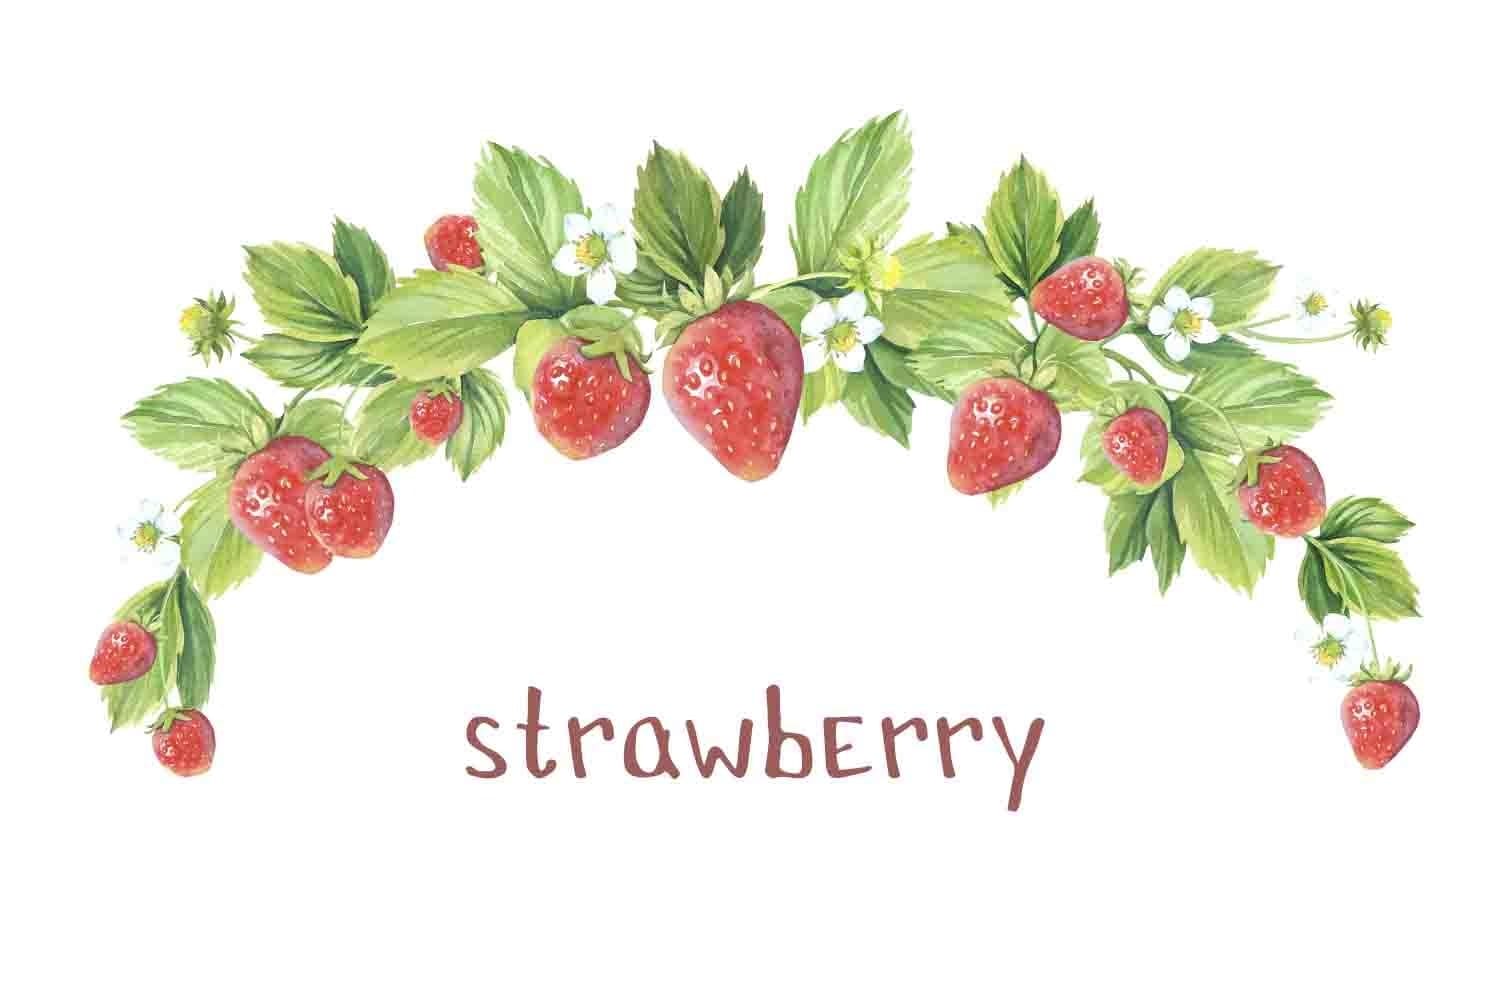 Strawberries of different sizes, strawberry leaves and flowers in the form of a border.